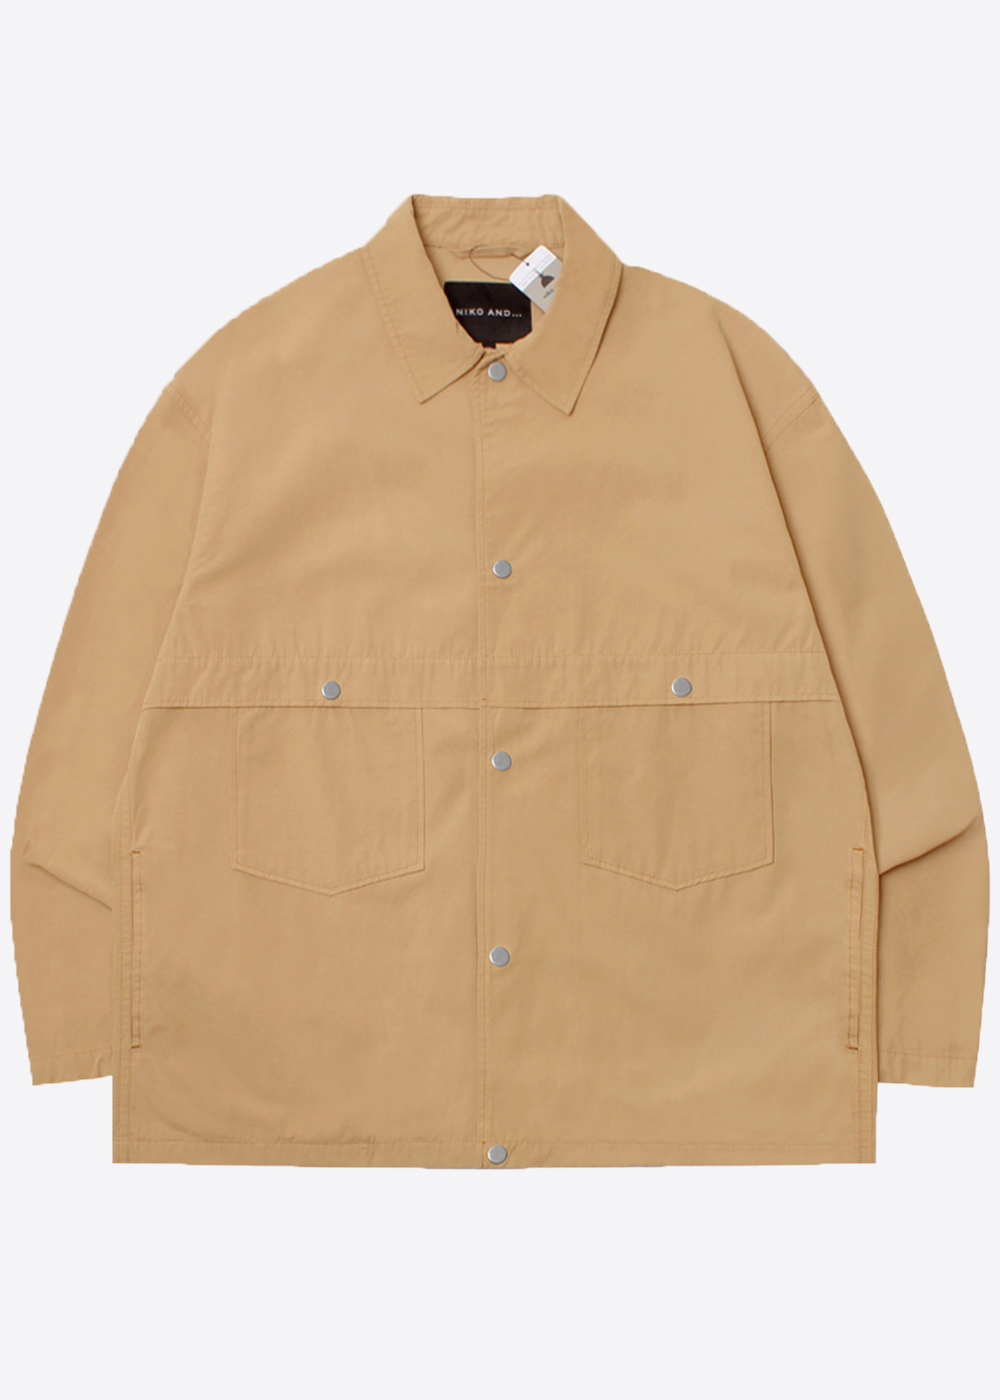 NIKO AND’over fit’cotton hunting jacket